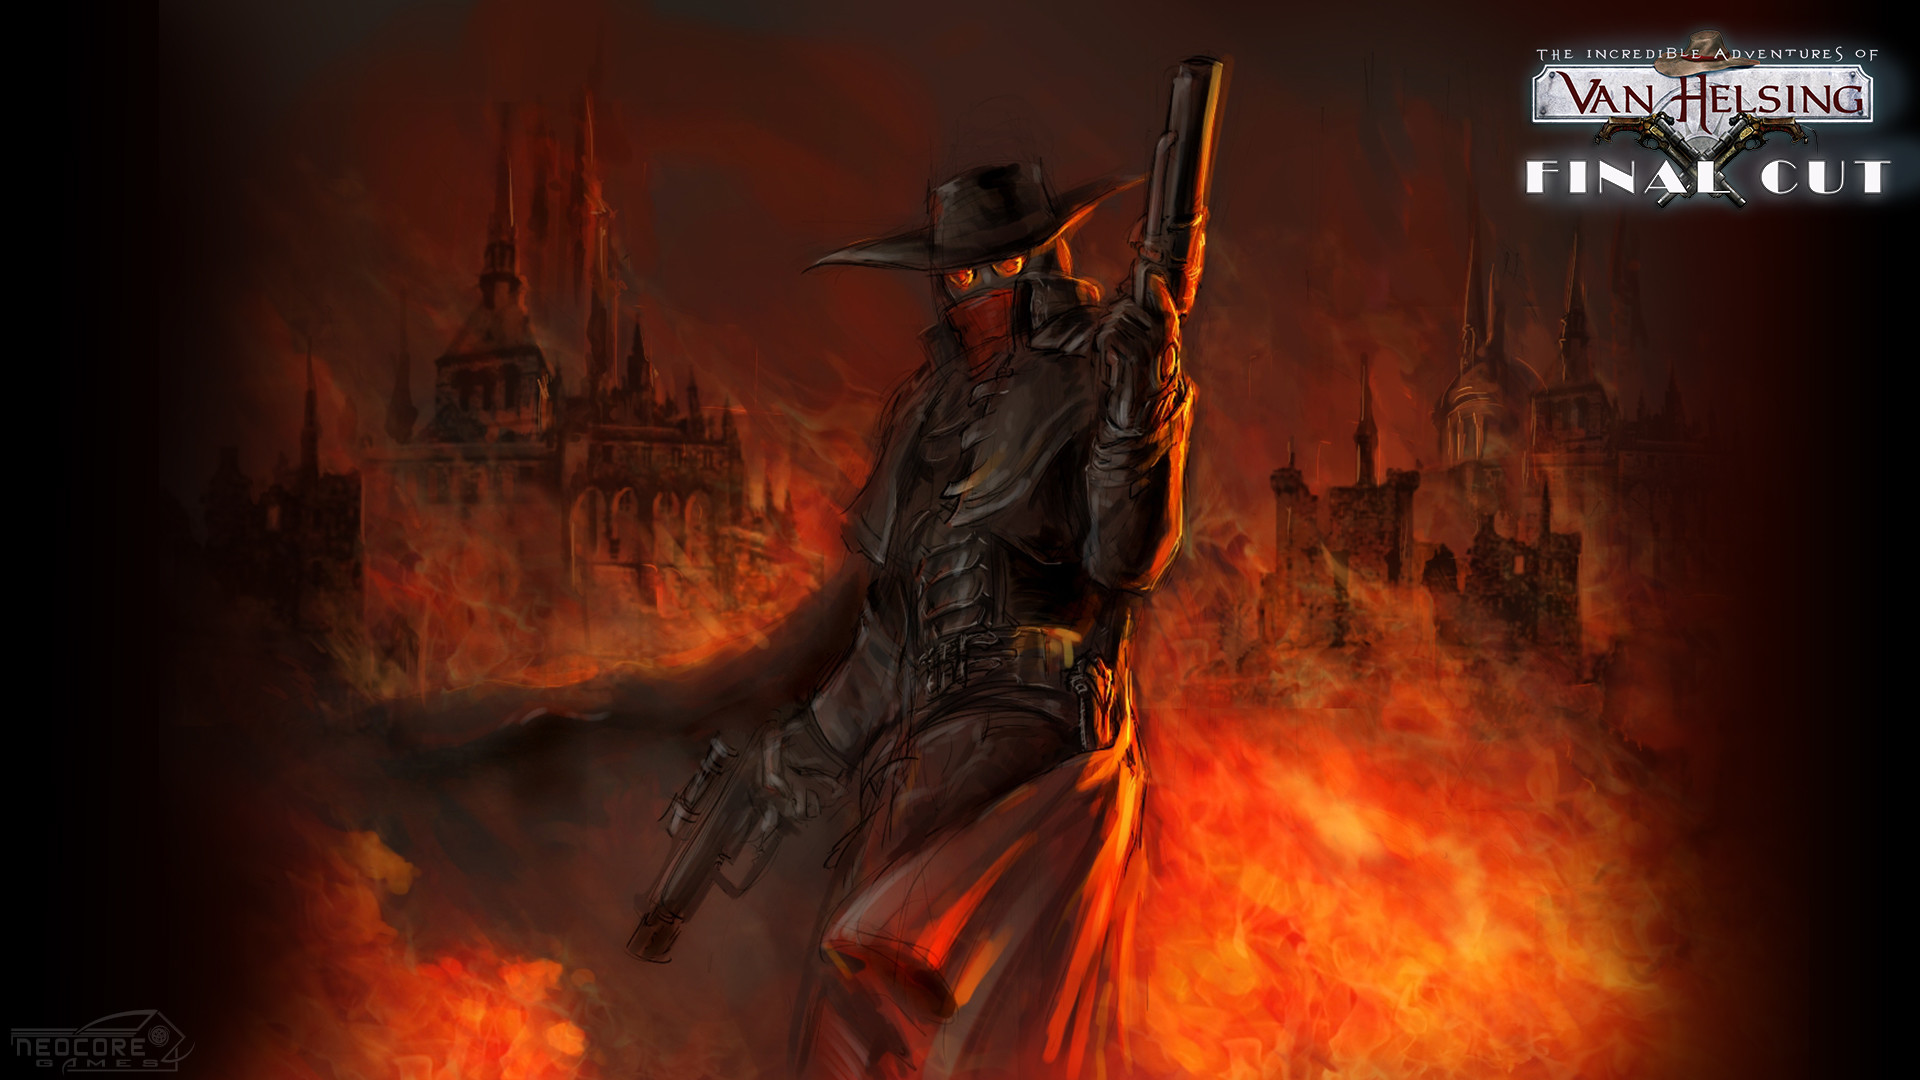 1920x1080 I Shouldn't Have Waited So Long To Play The Incredible Adventures of Van  Helsing .